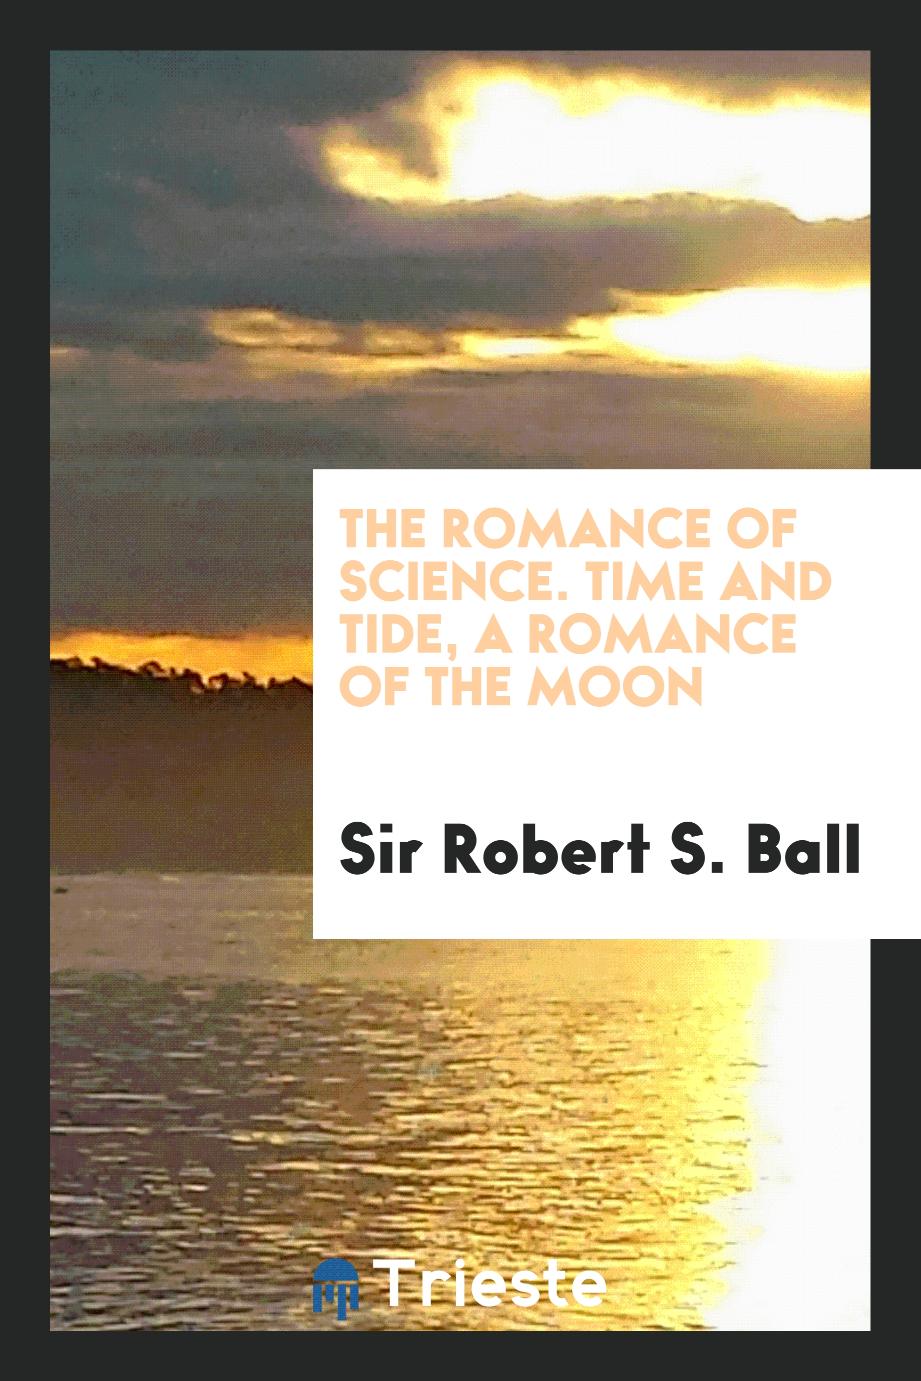 The romance of science. Time and tide, a romance of the moon